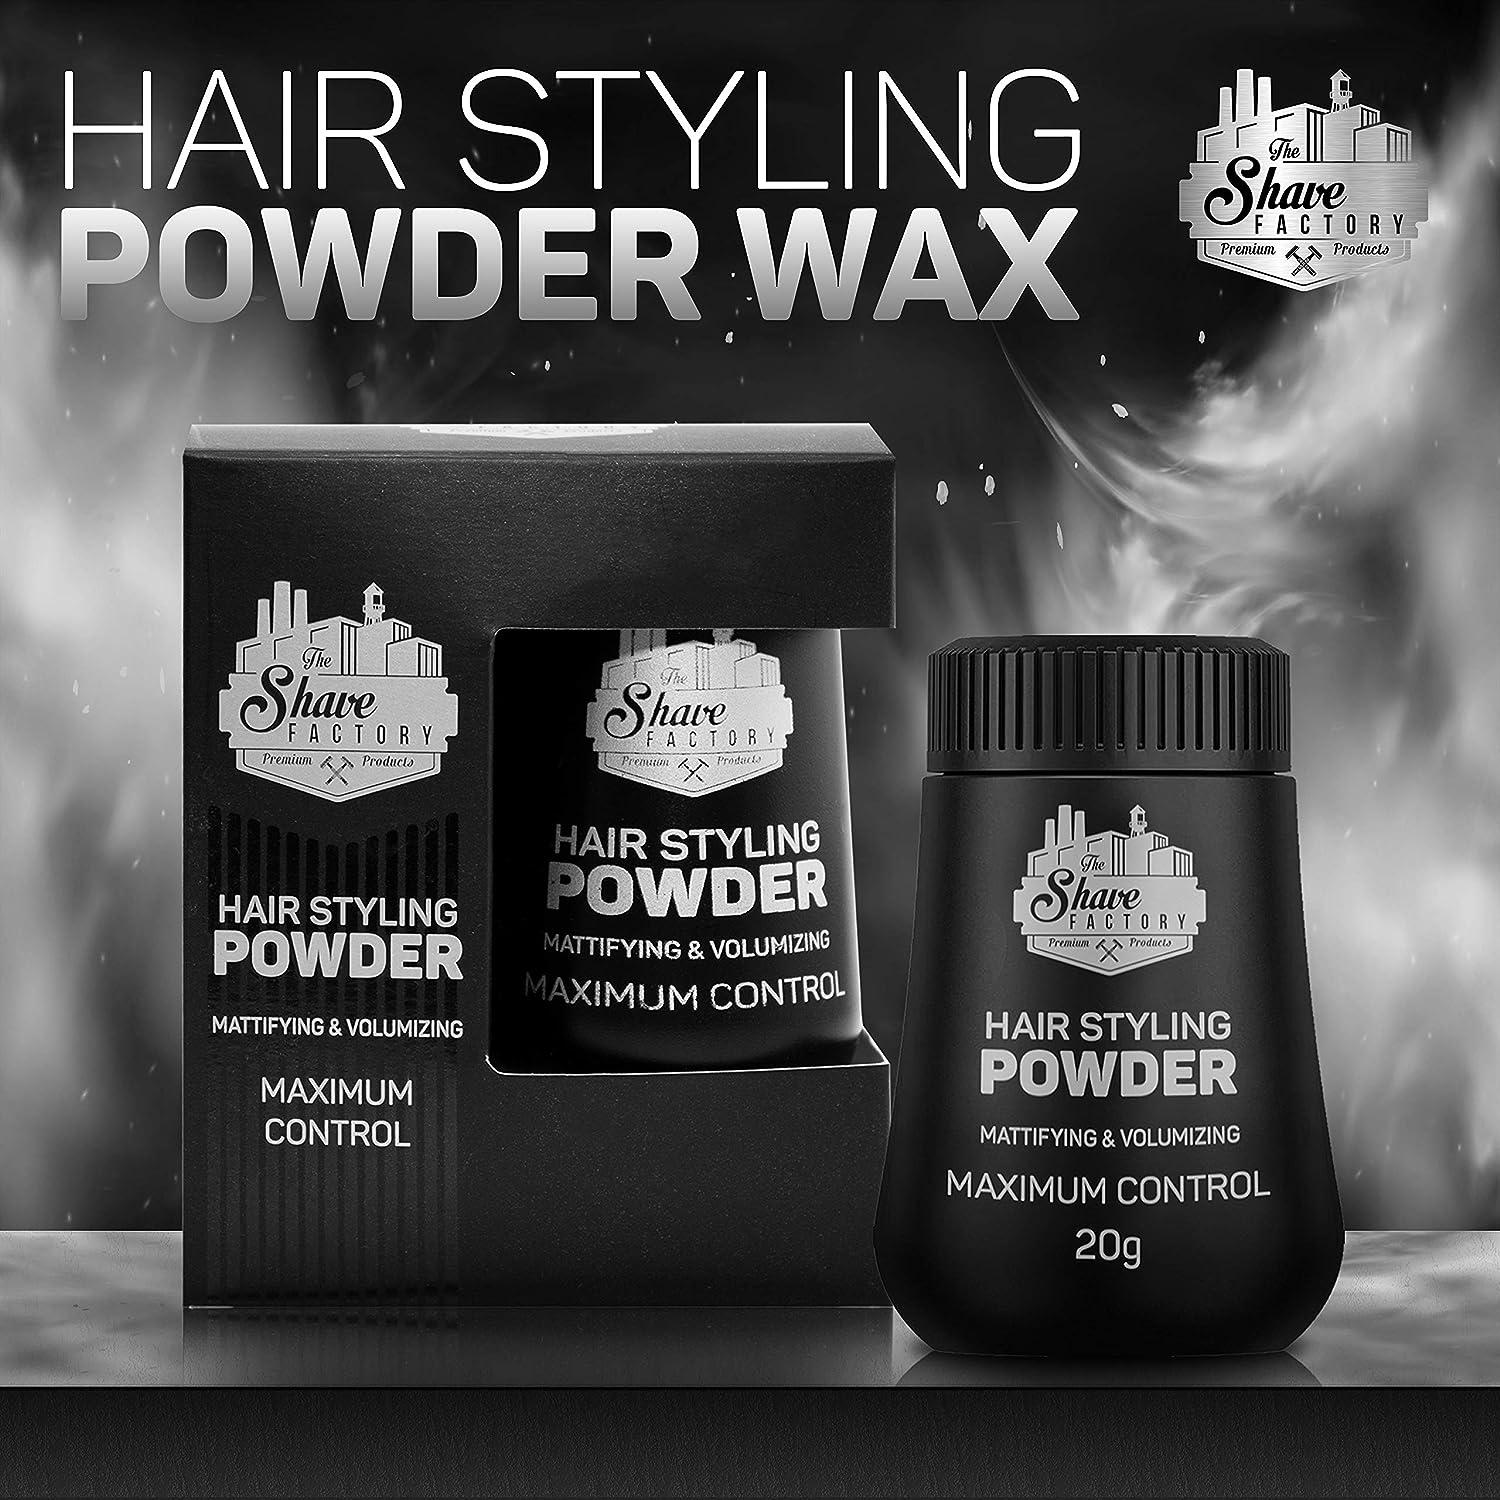 The Shave Factory - Hair Styling Powder